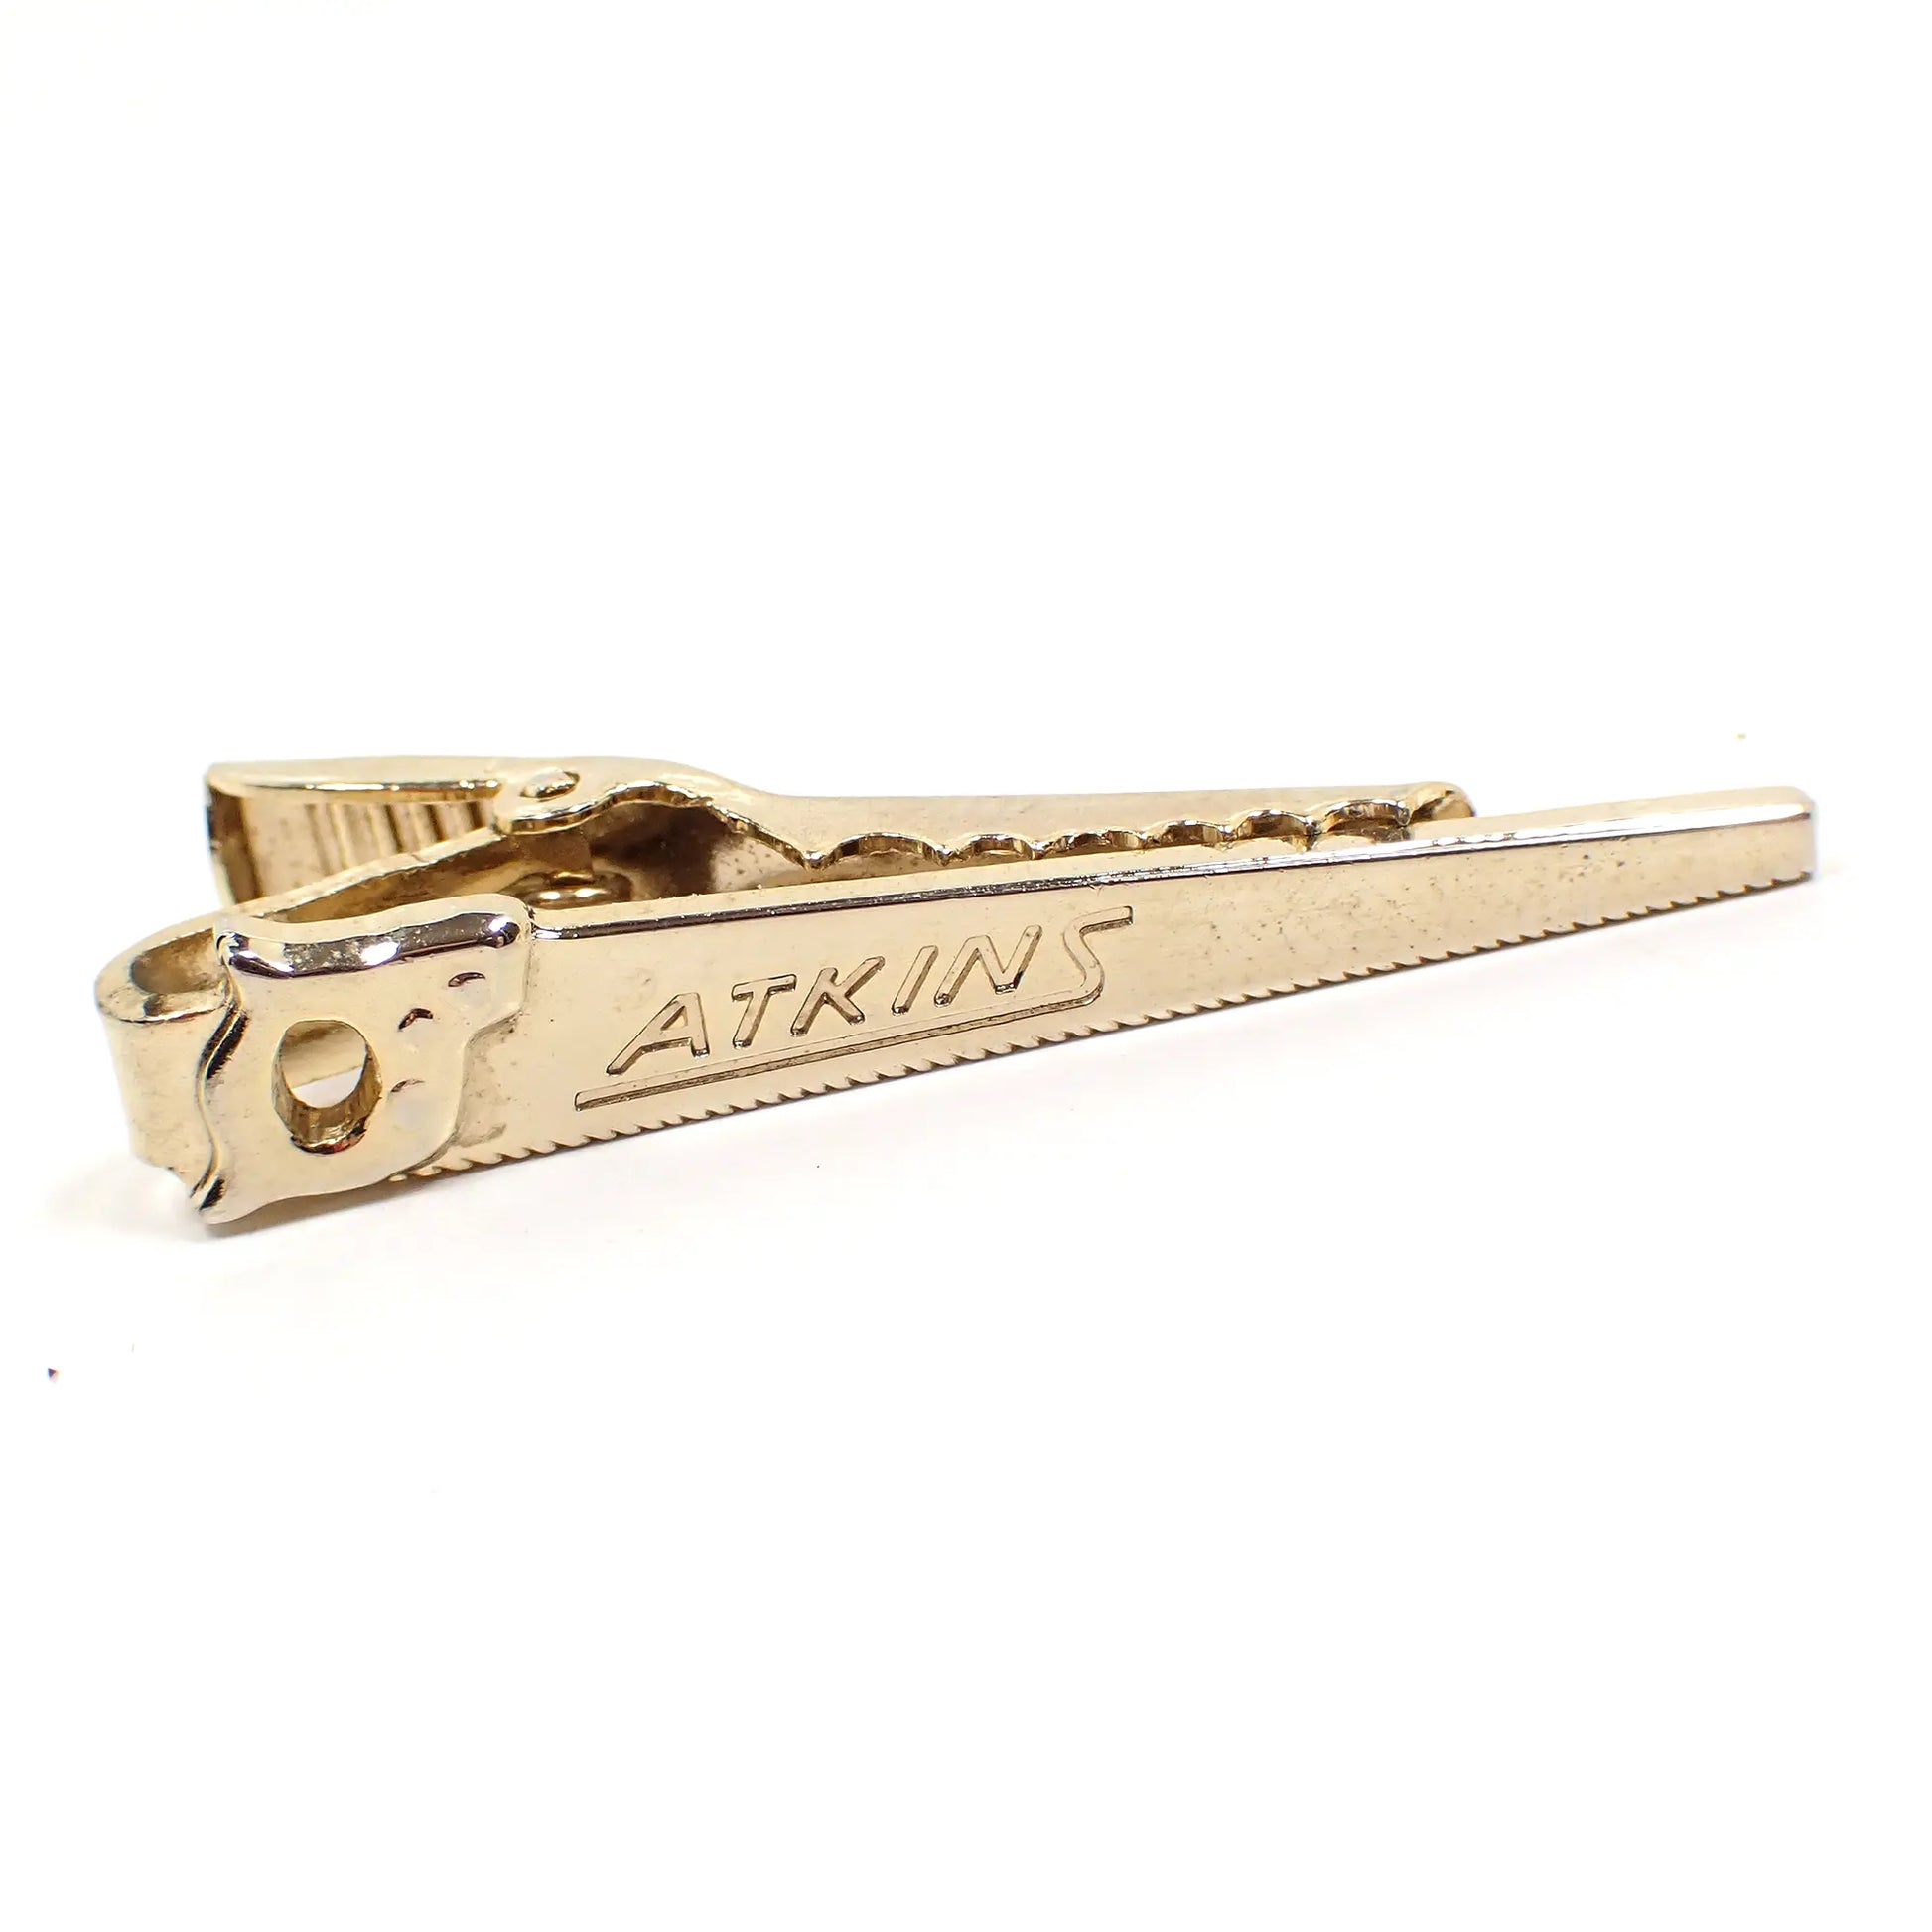 Front view of the Mid Century vintage tie clip. The metal is gold tone in color. It is shaped like a long hand saw with the company name Atkins on the front.